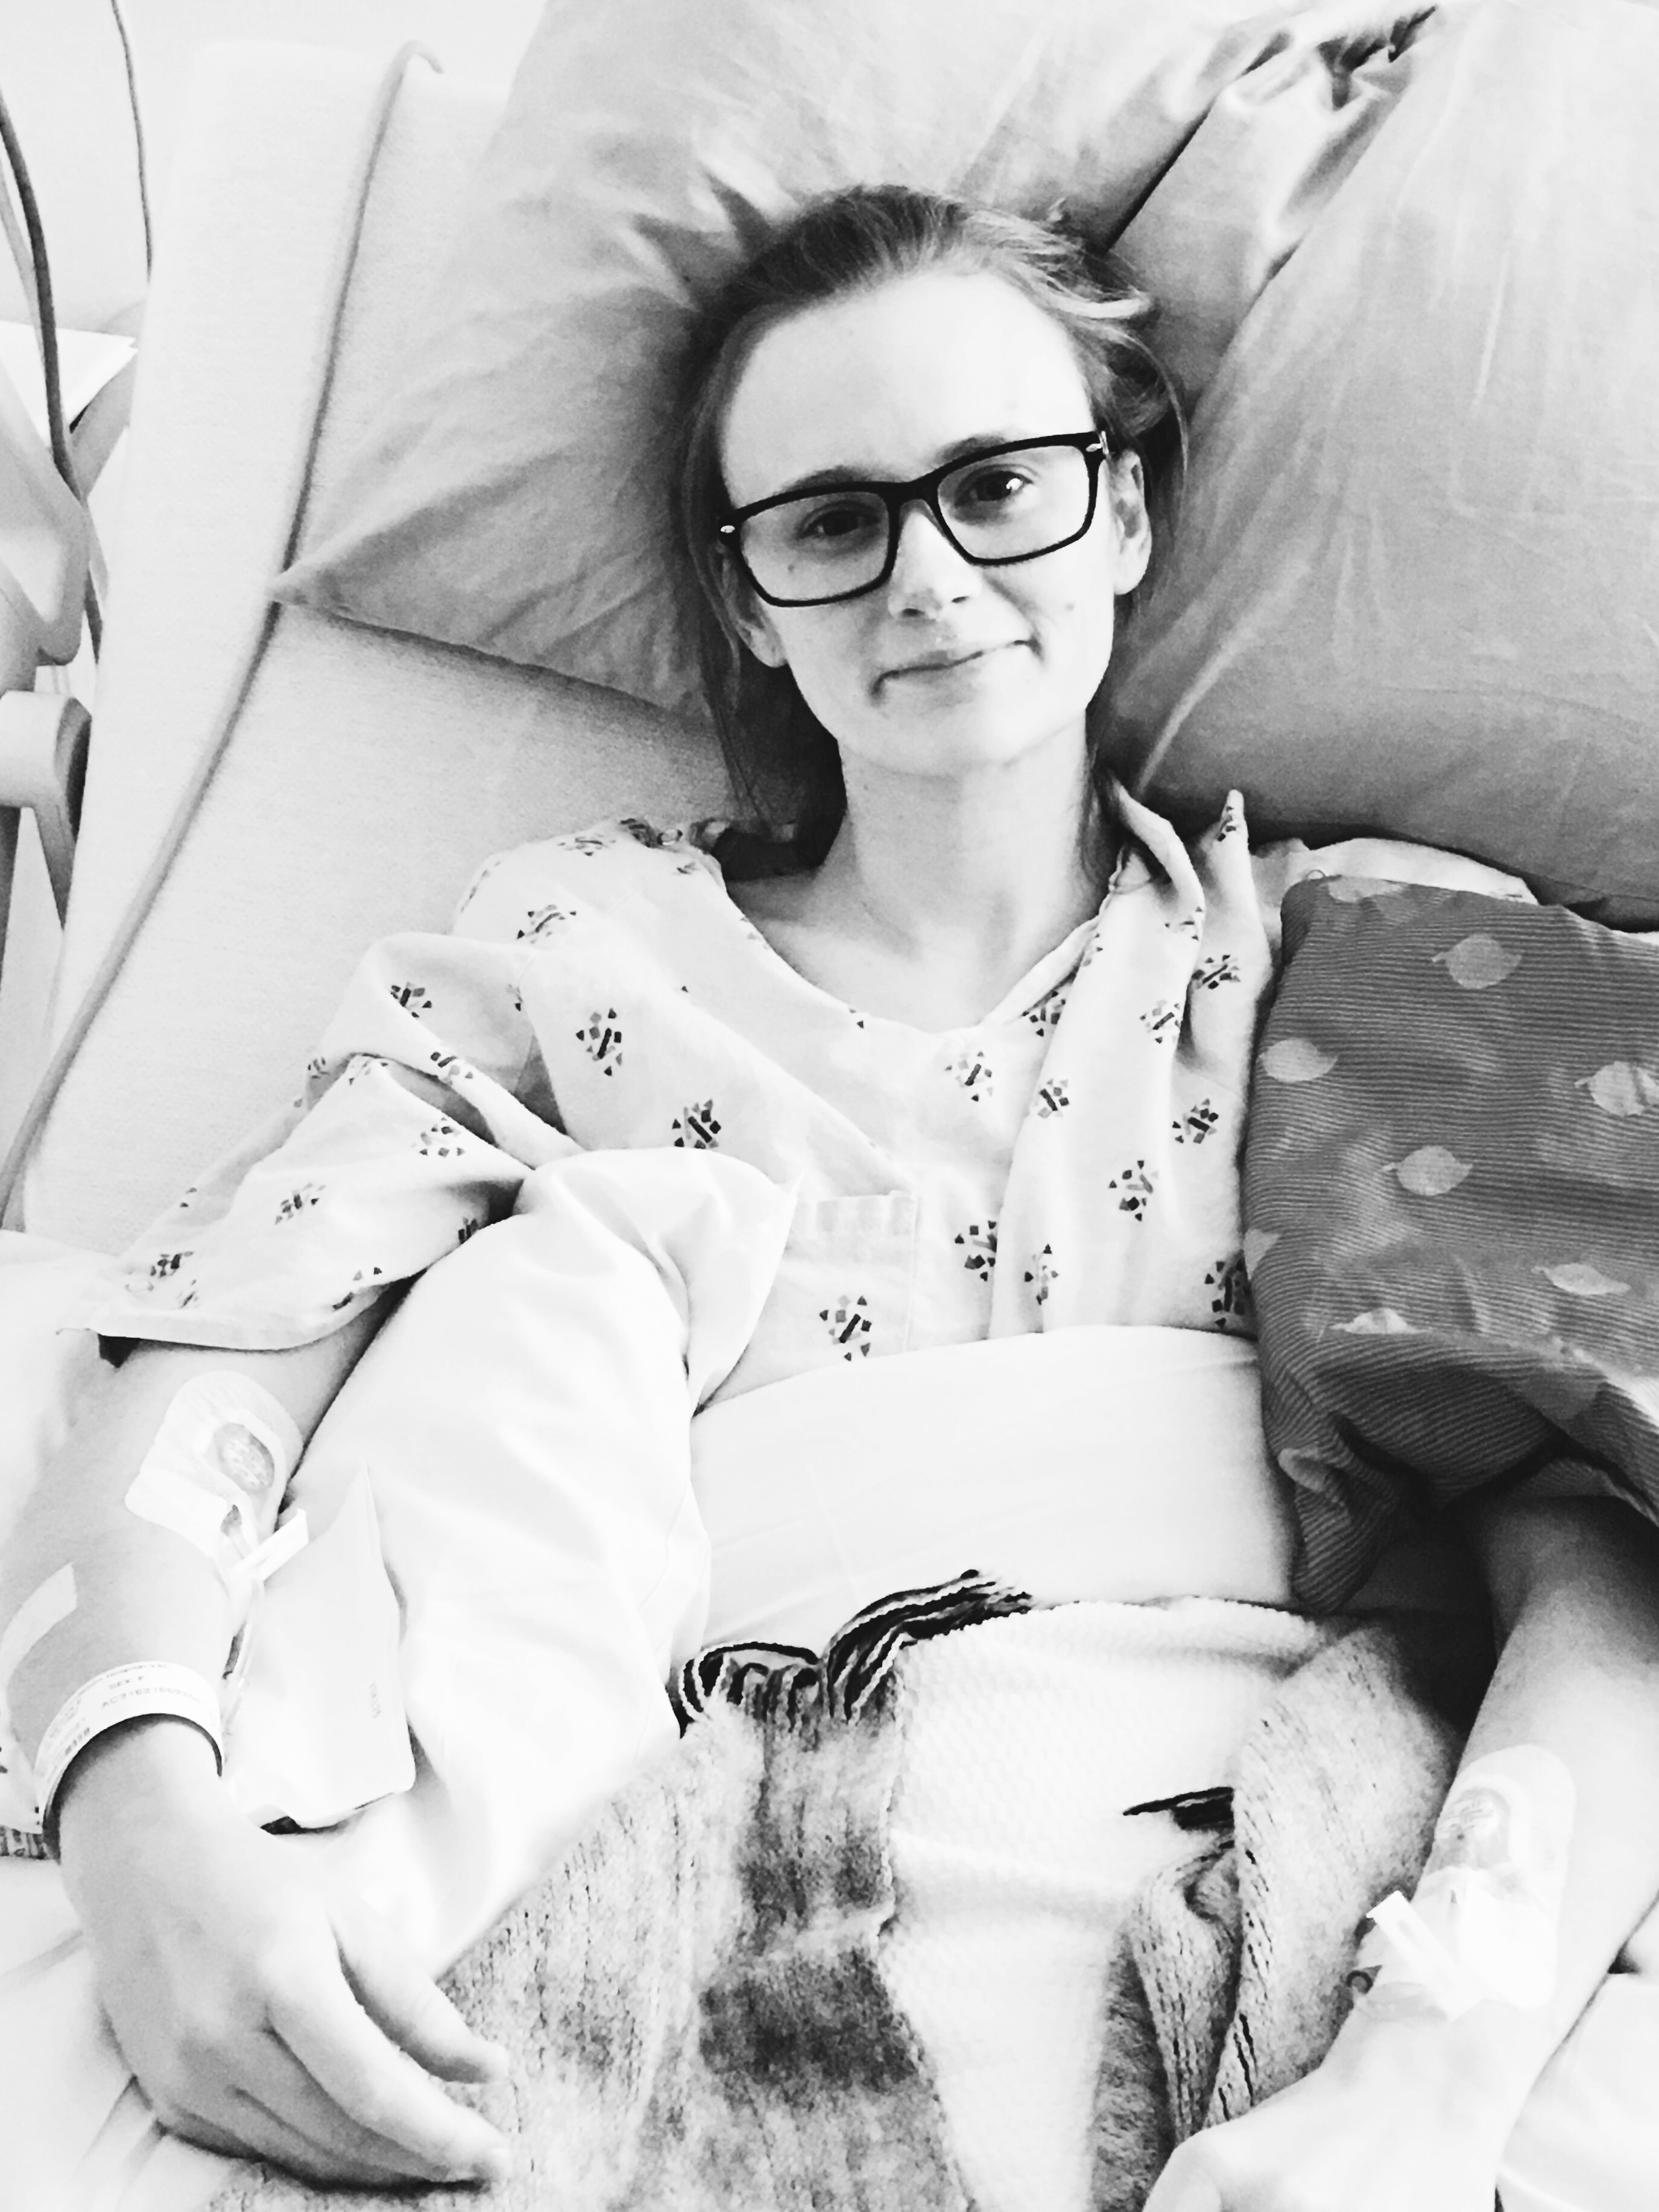 Picture of the author, Megan, in a hospital bed.